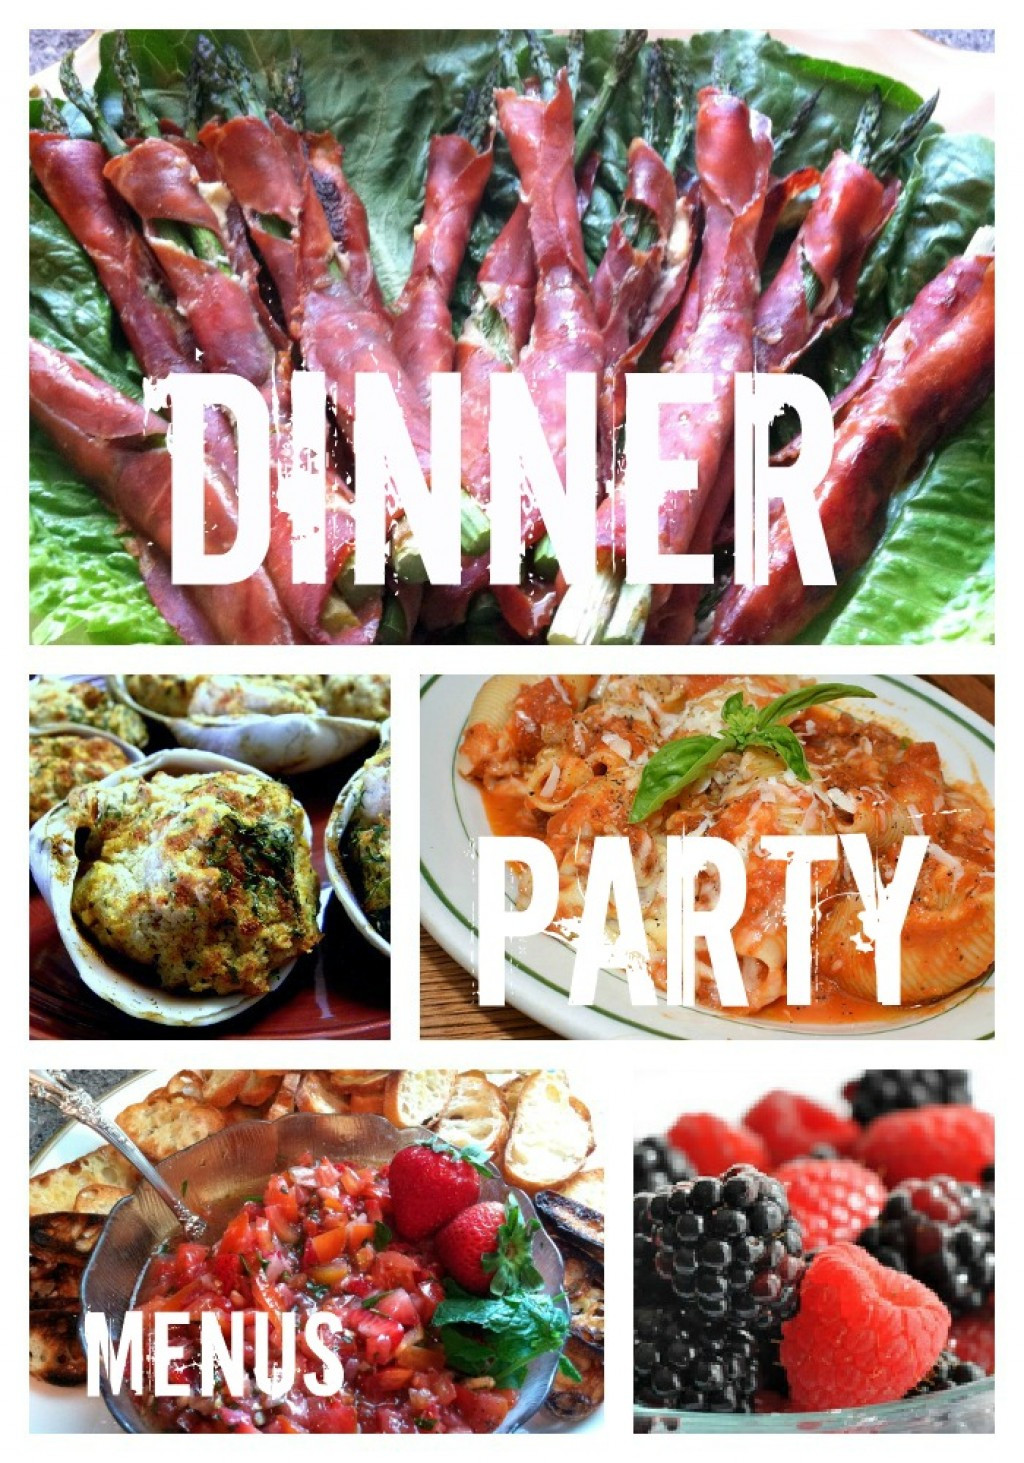 Dinner Party Recipes Ideas
 Dinner Party Recipes